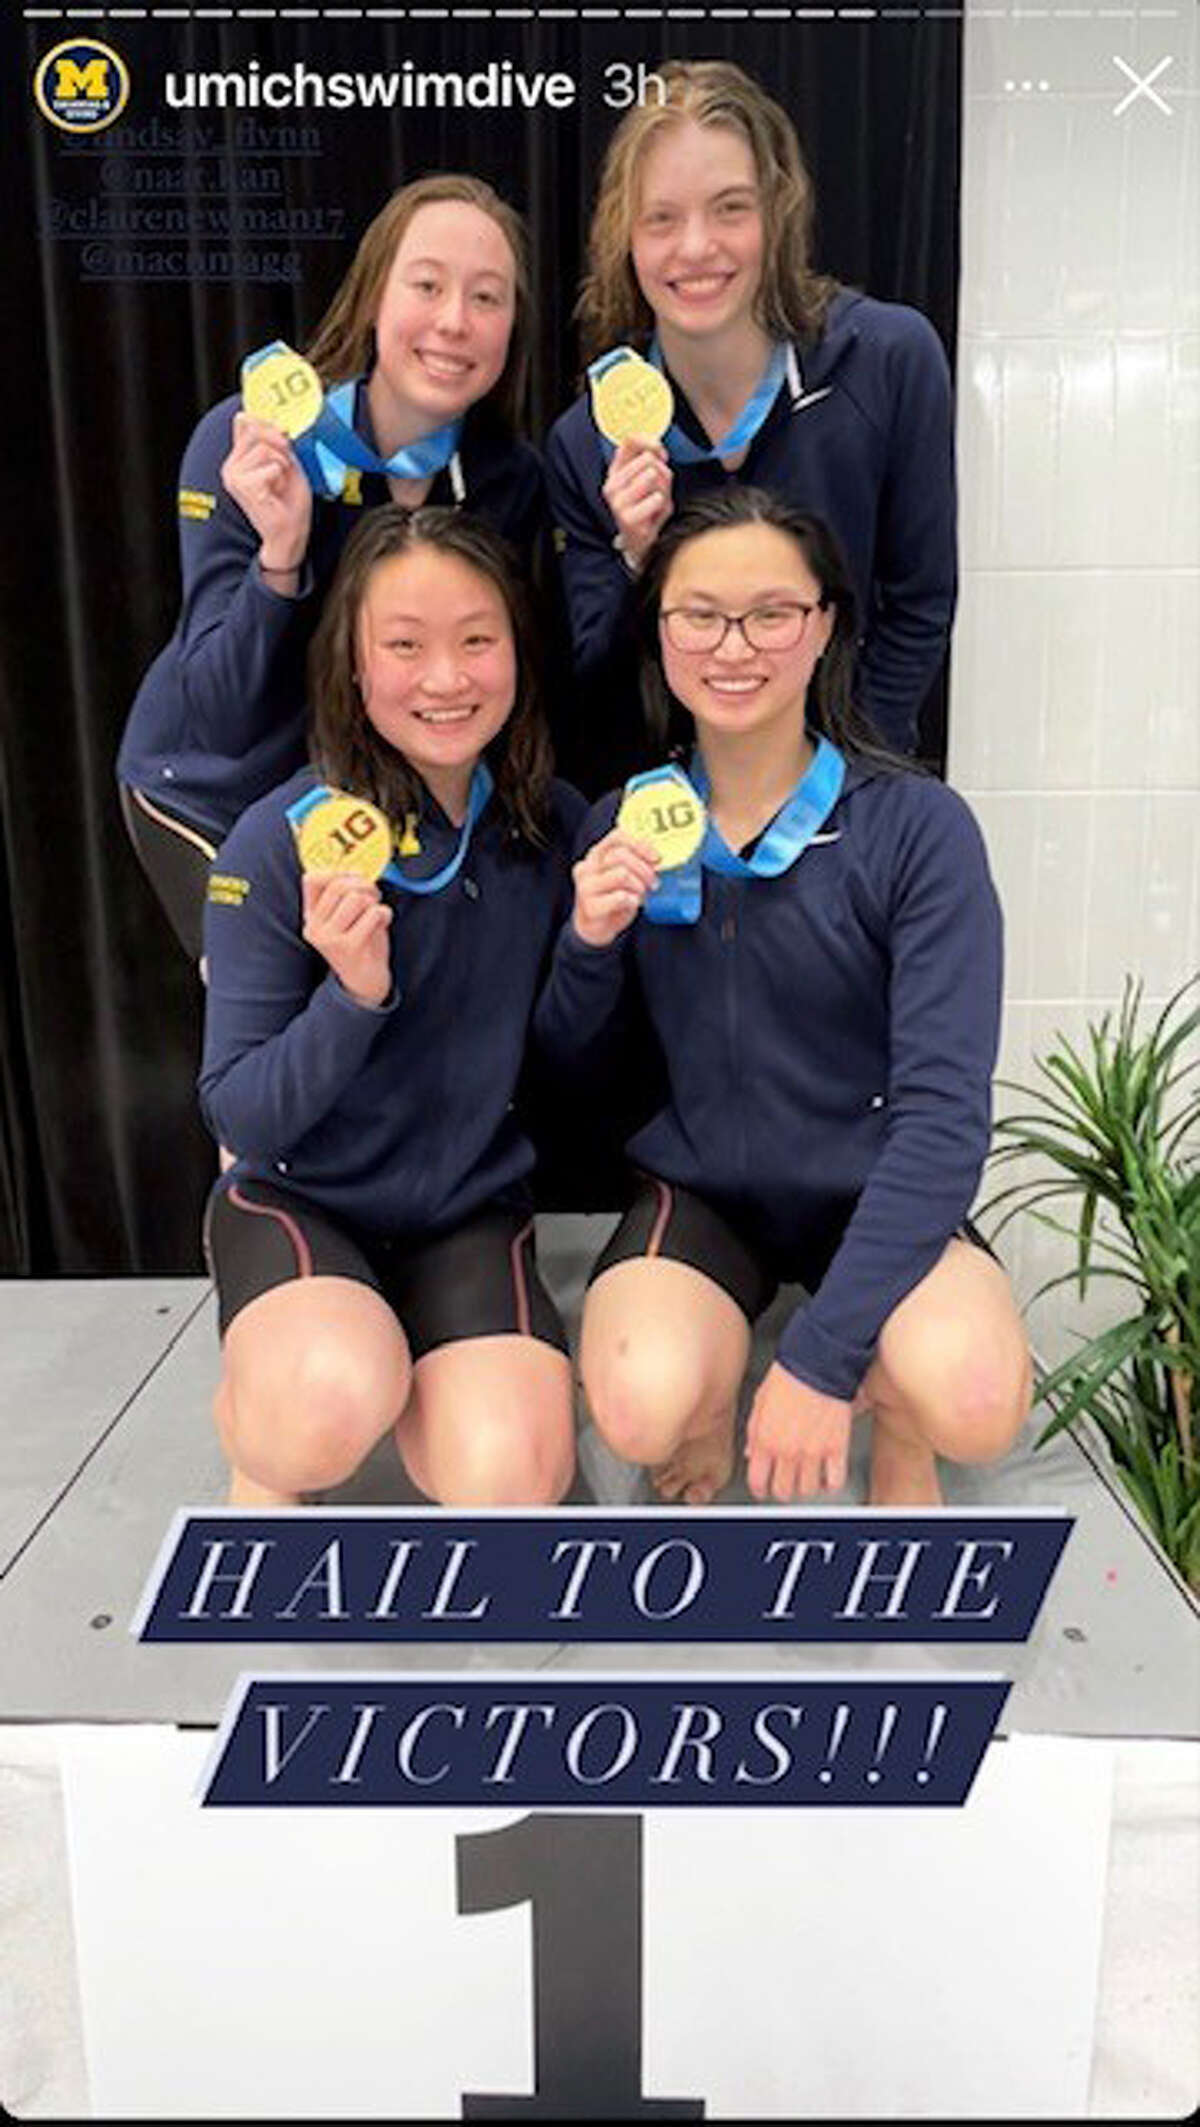 Michigan's Claire Newman (back right) poses with teammates Maggie MacNeil, Cheuk Kan, and Lindsay Flynn after setting a meet record and school record in the 200 freestyle relay at the Big Ten Championship held in Madison, Wis., Feb. 16-19, 2022.